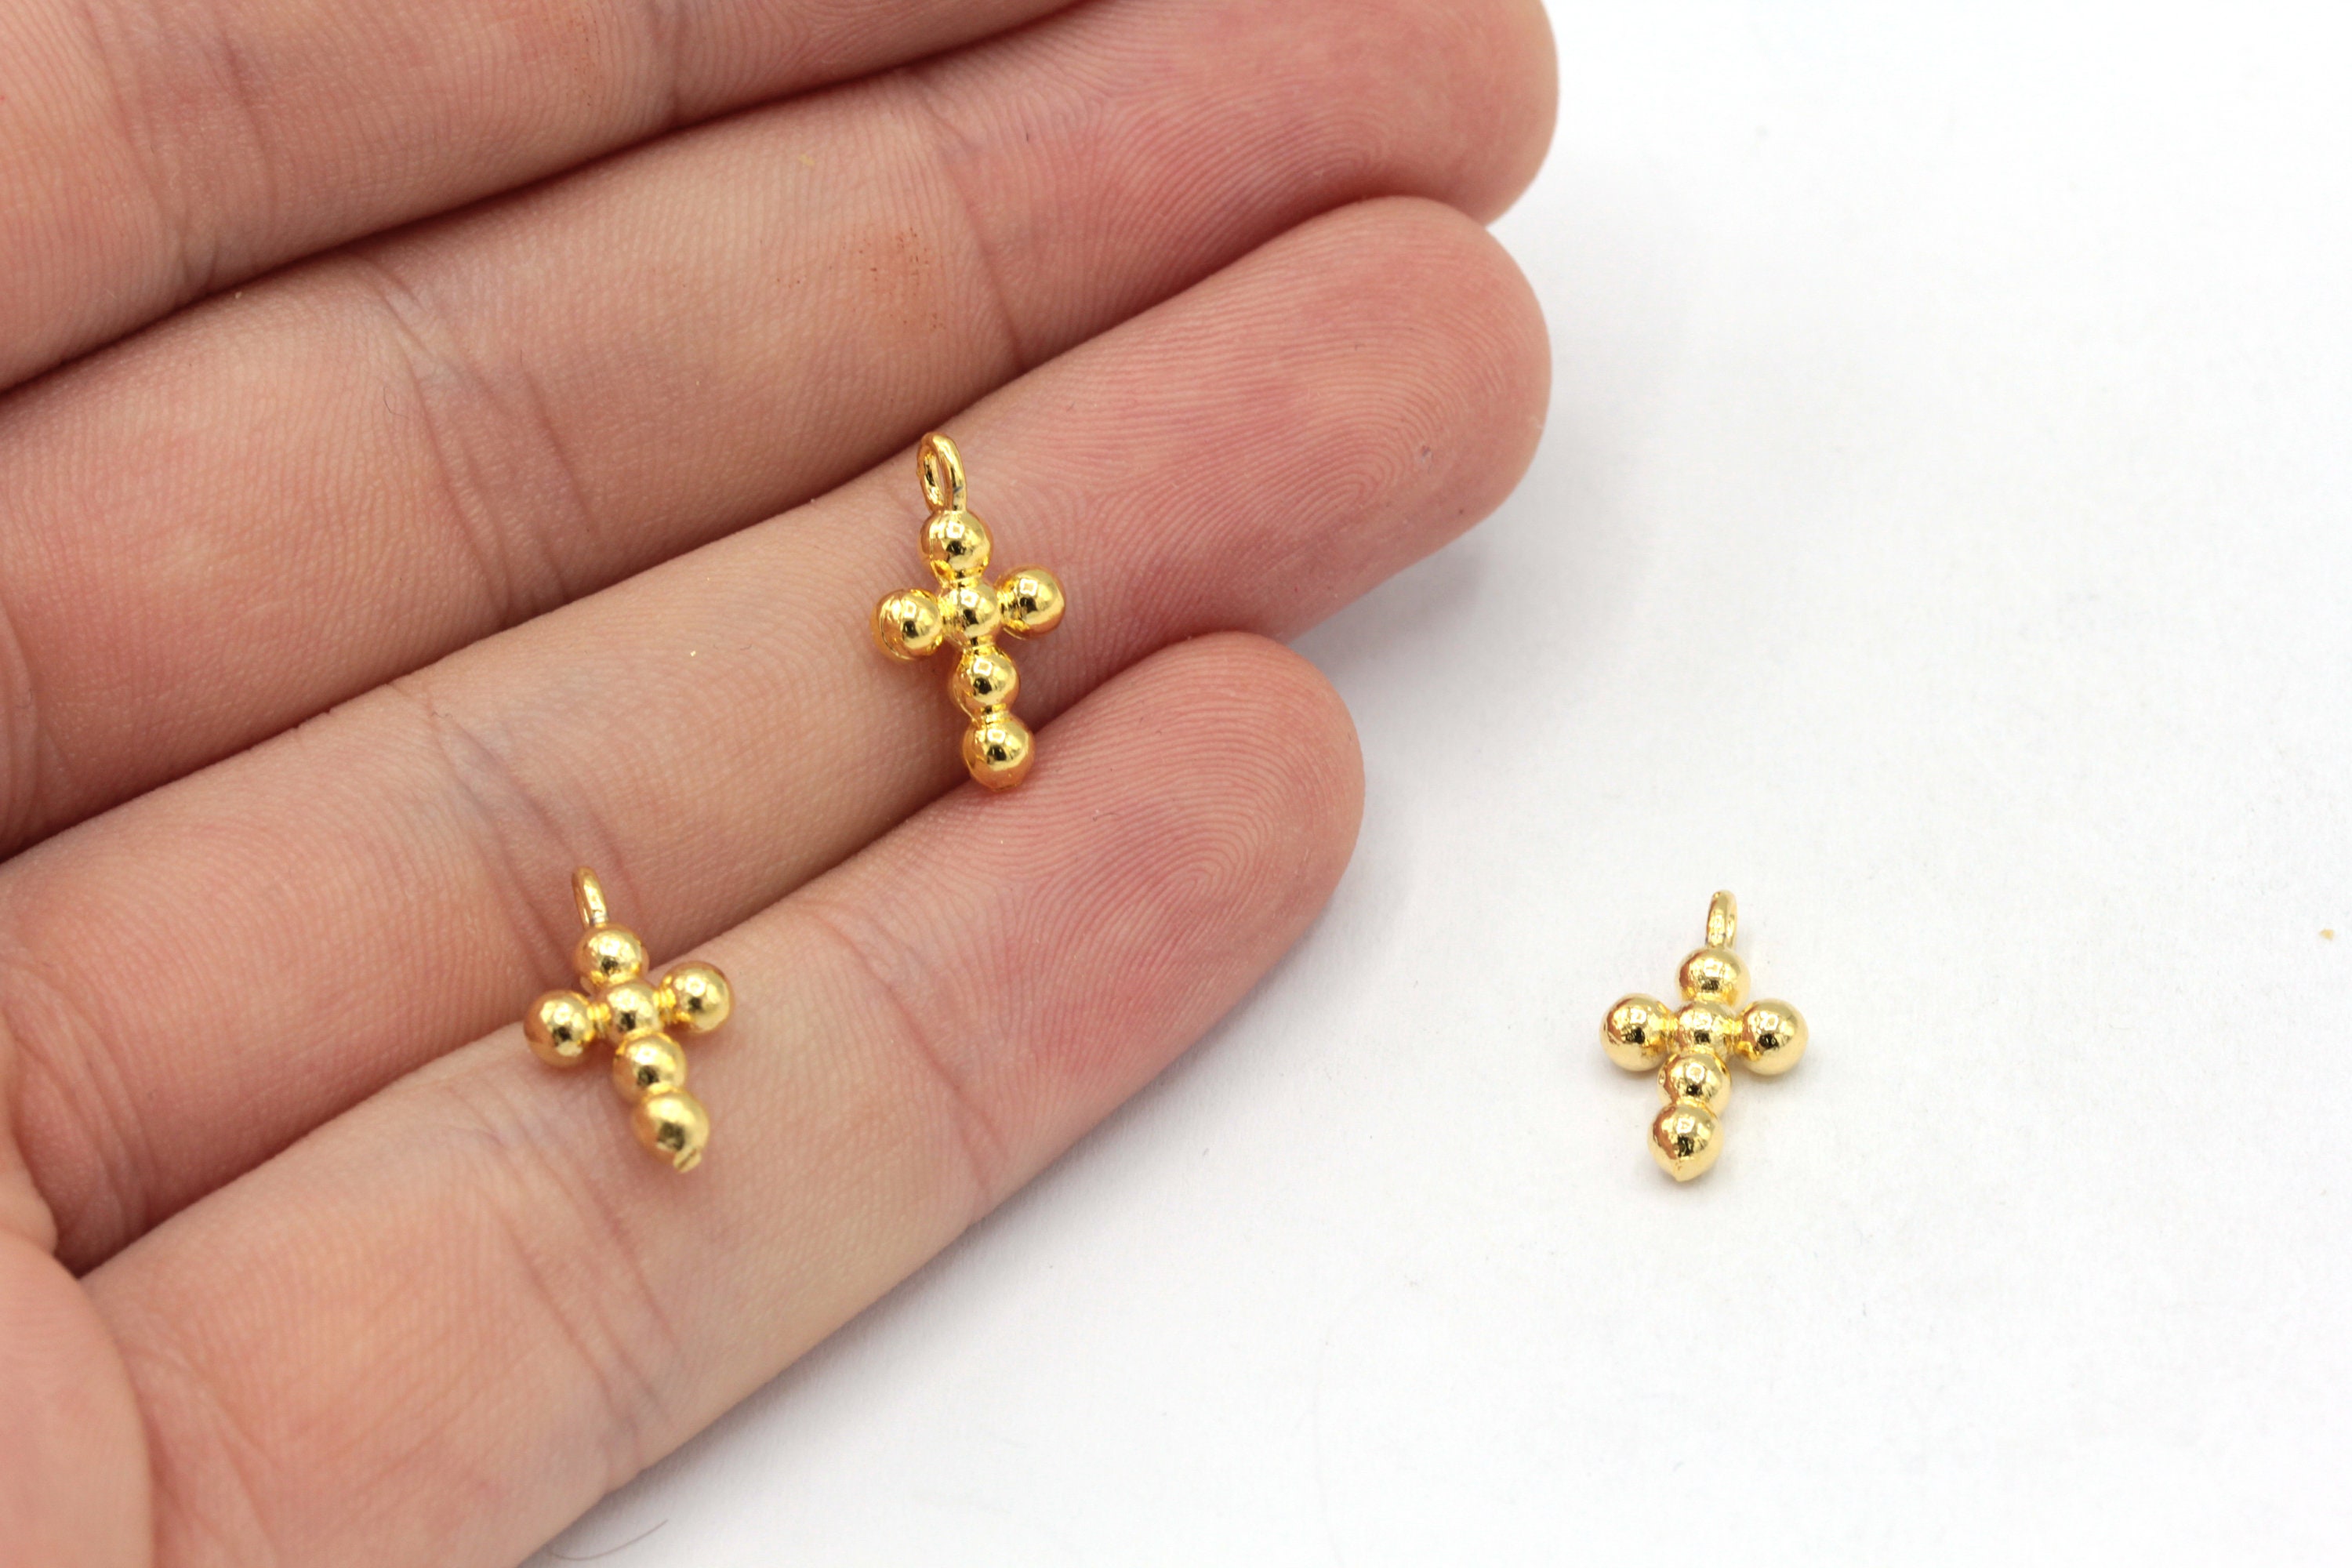 KitBeads 10pcs Christian Crucifix Charms Gold Plated Cross Charms Clear Cubic Zirconia Cross Charms for Jewelry Making Bracelets Bulk